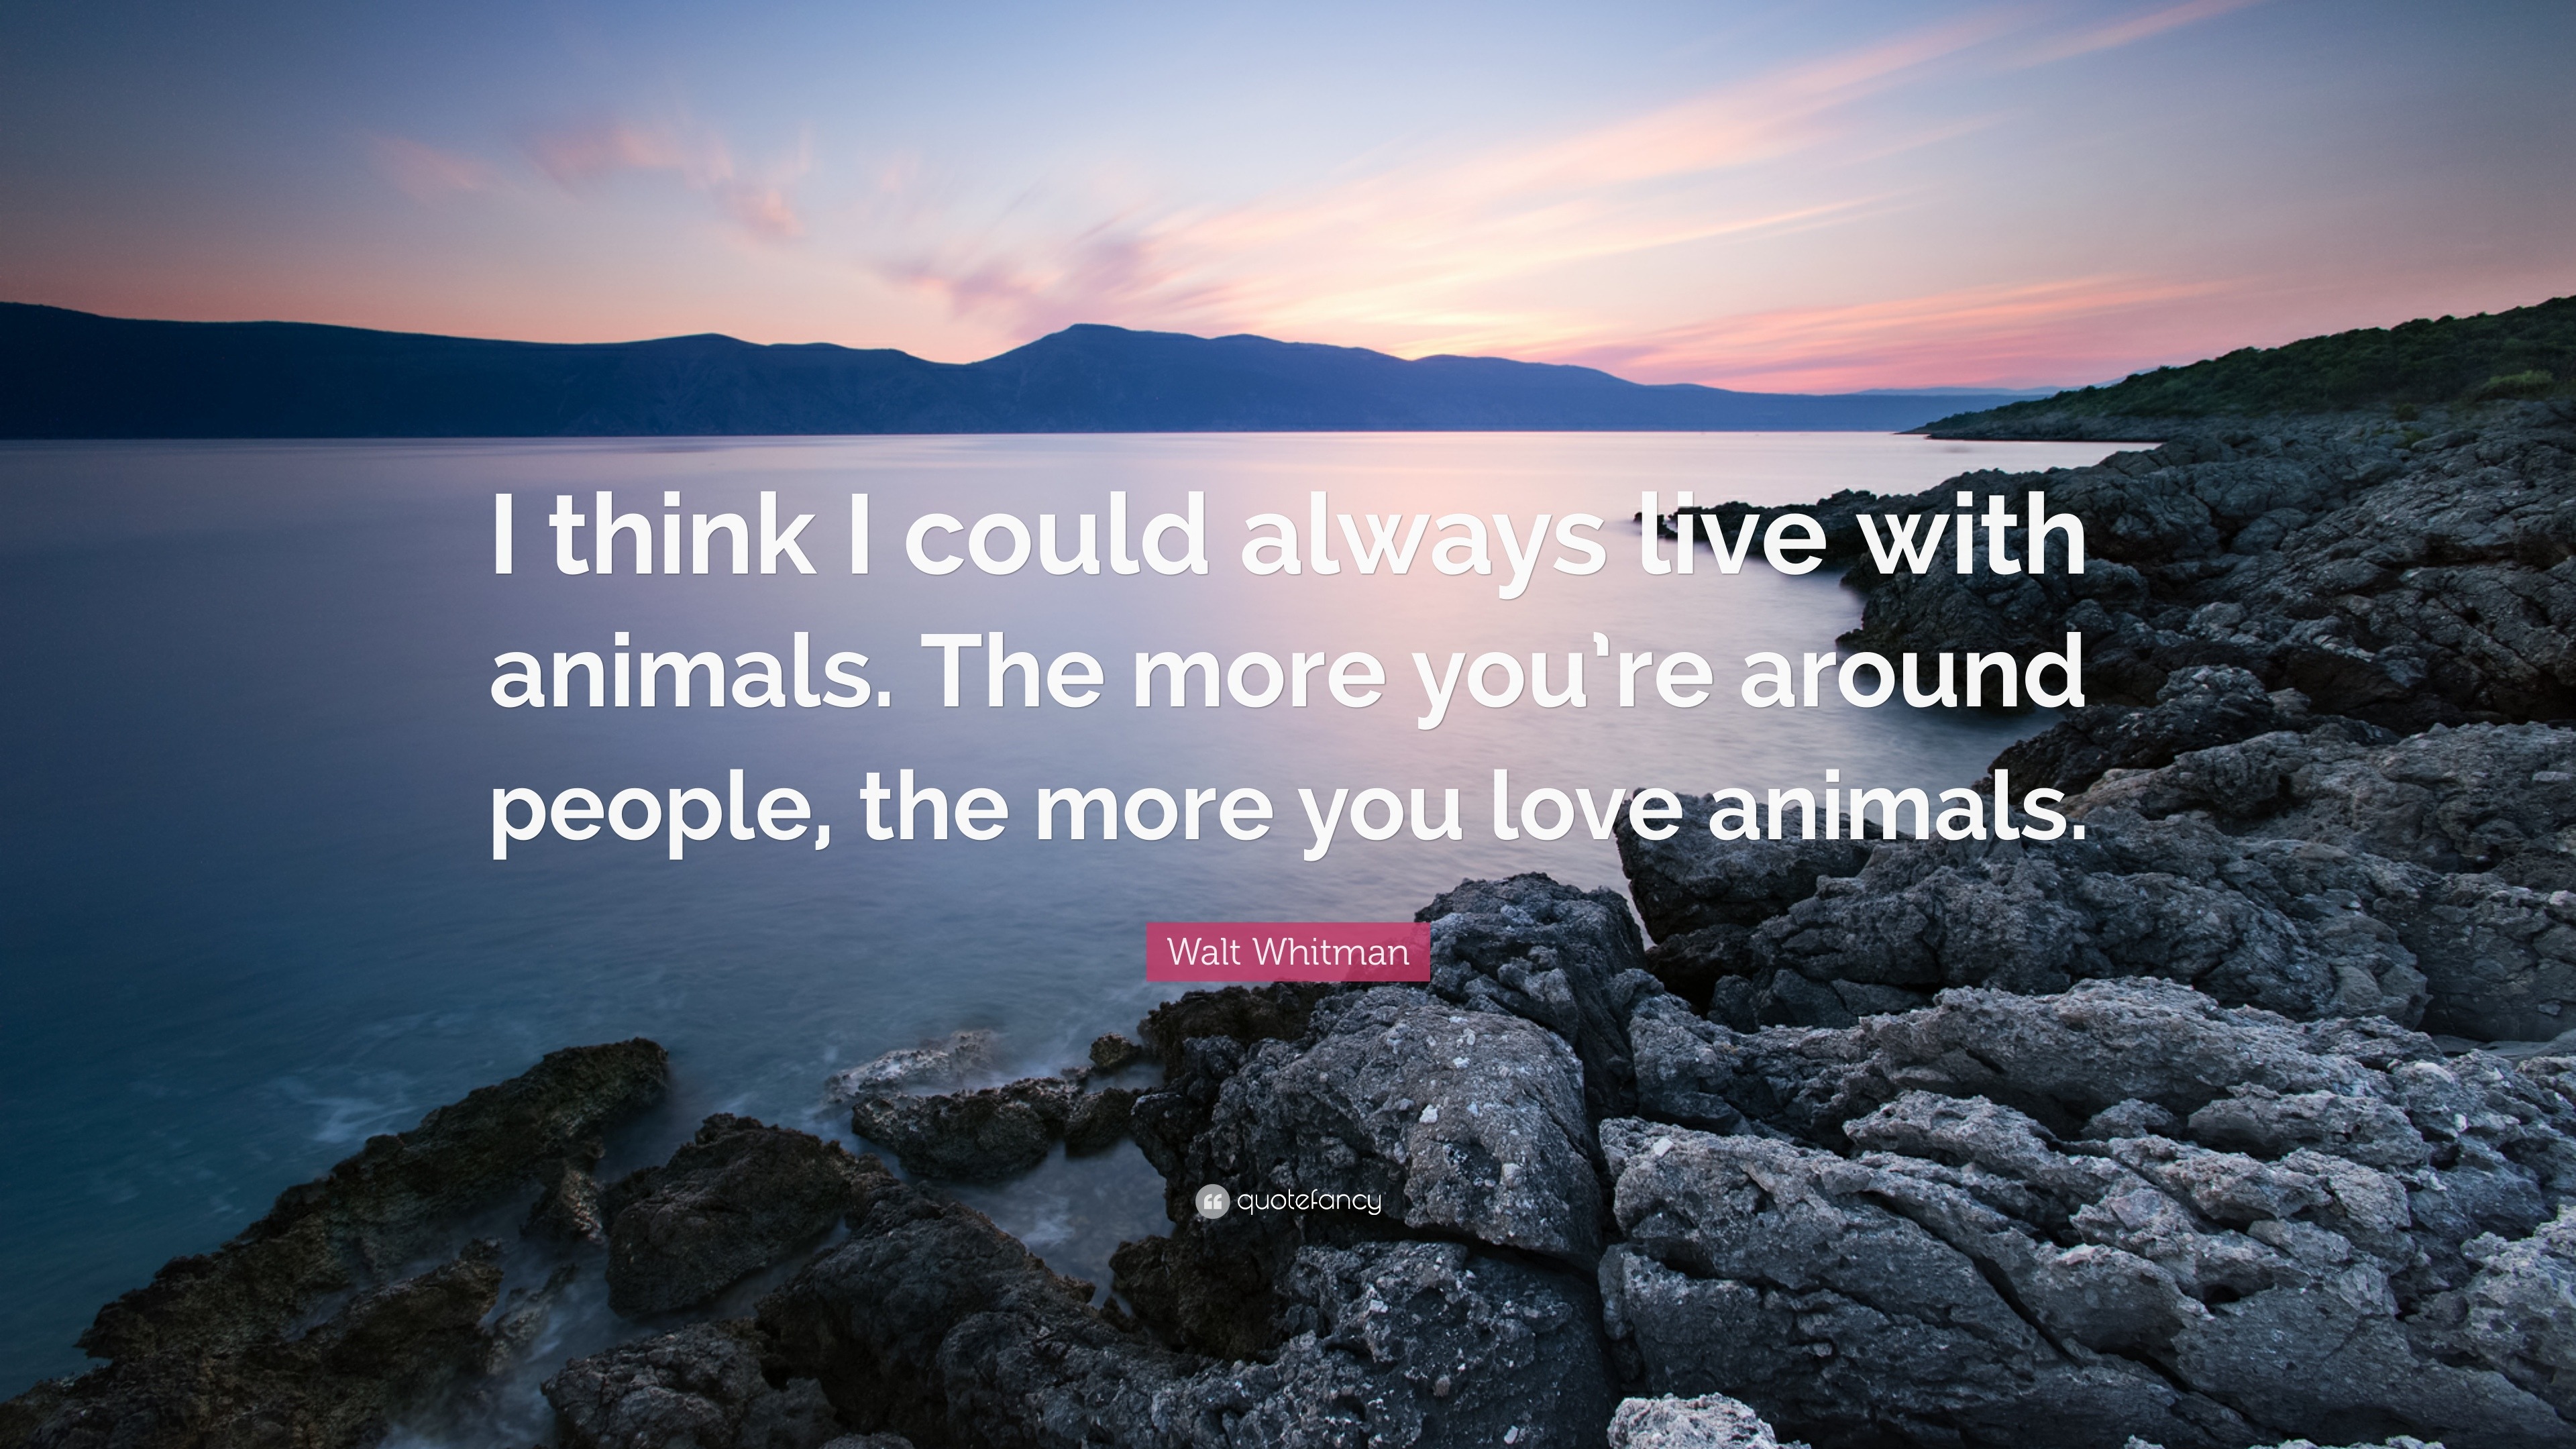 Walt Whitman Quote: “I think I could always live with animals. The more  you're around